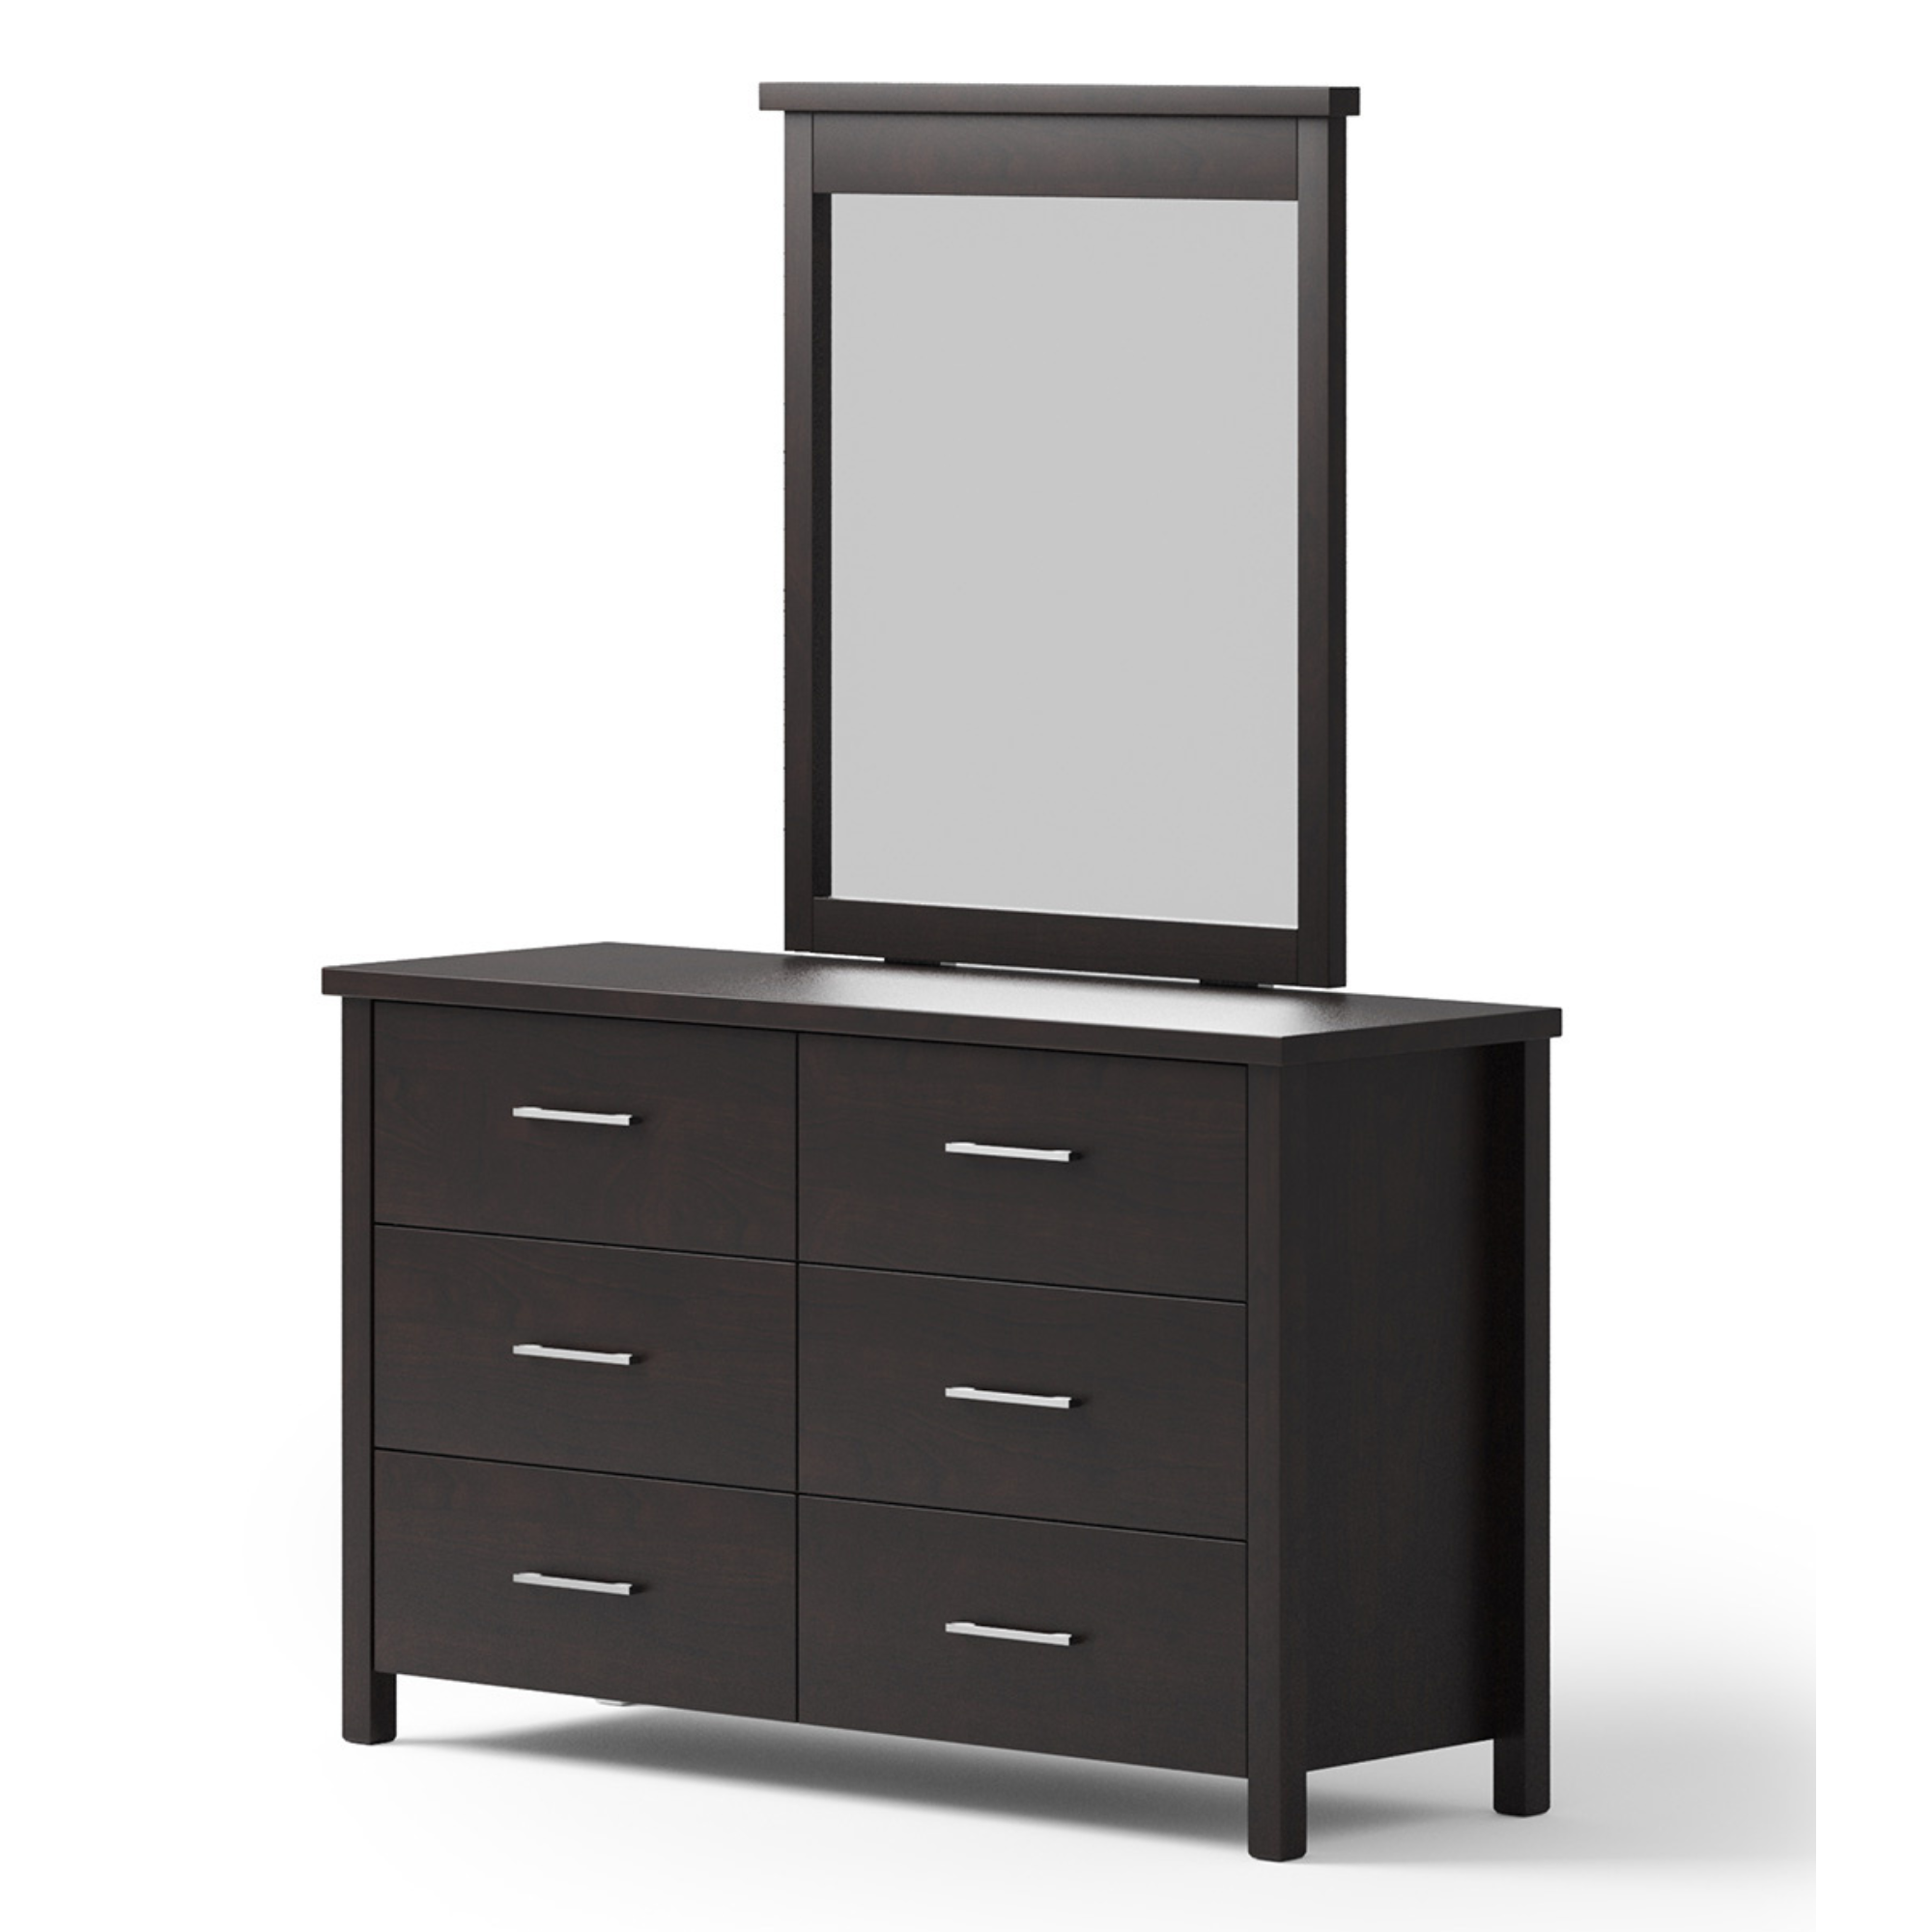 PORTLAND 6 DRAWER DUCHESS WITH MIRROR | NZ MADE BEDROOM FURNITURE